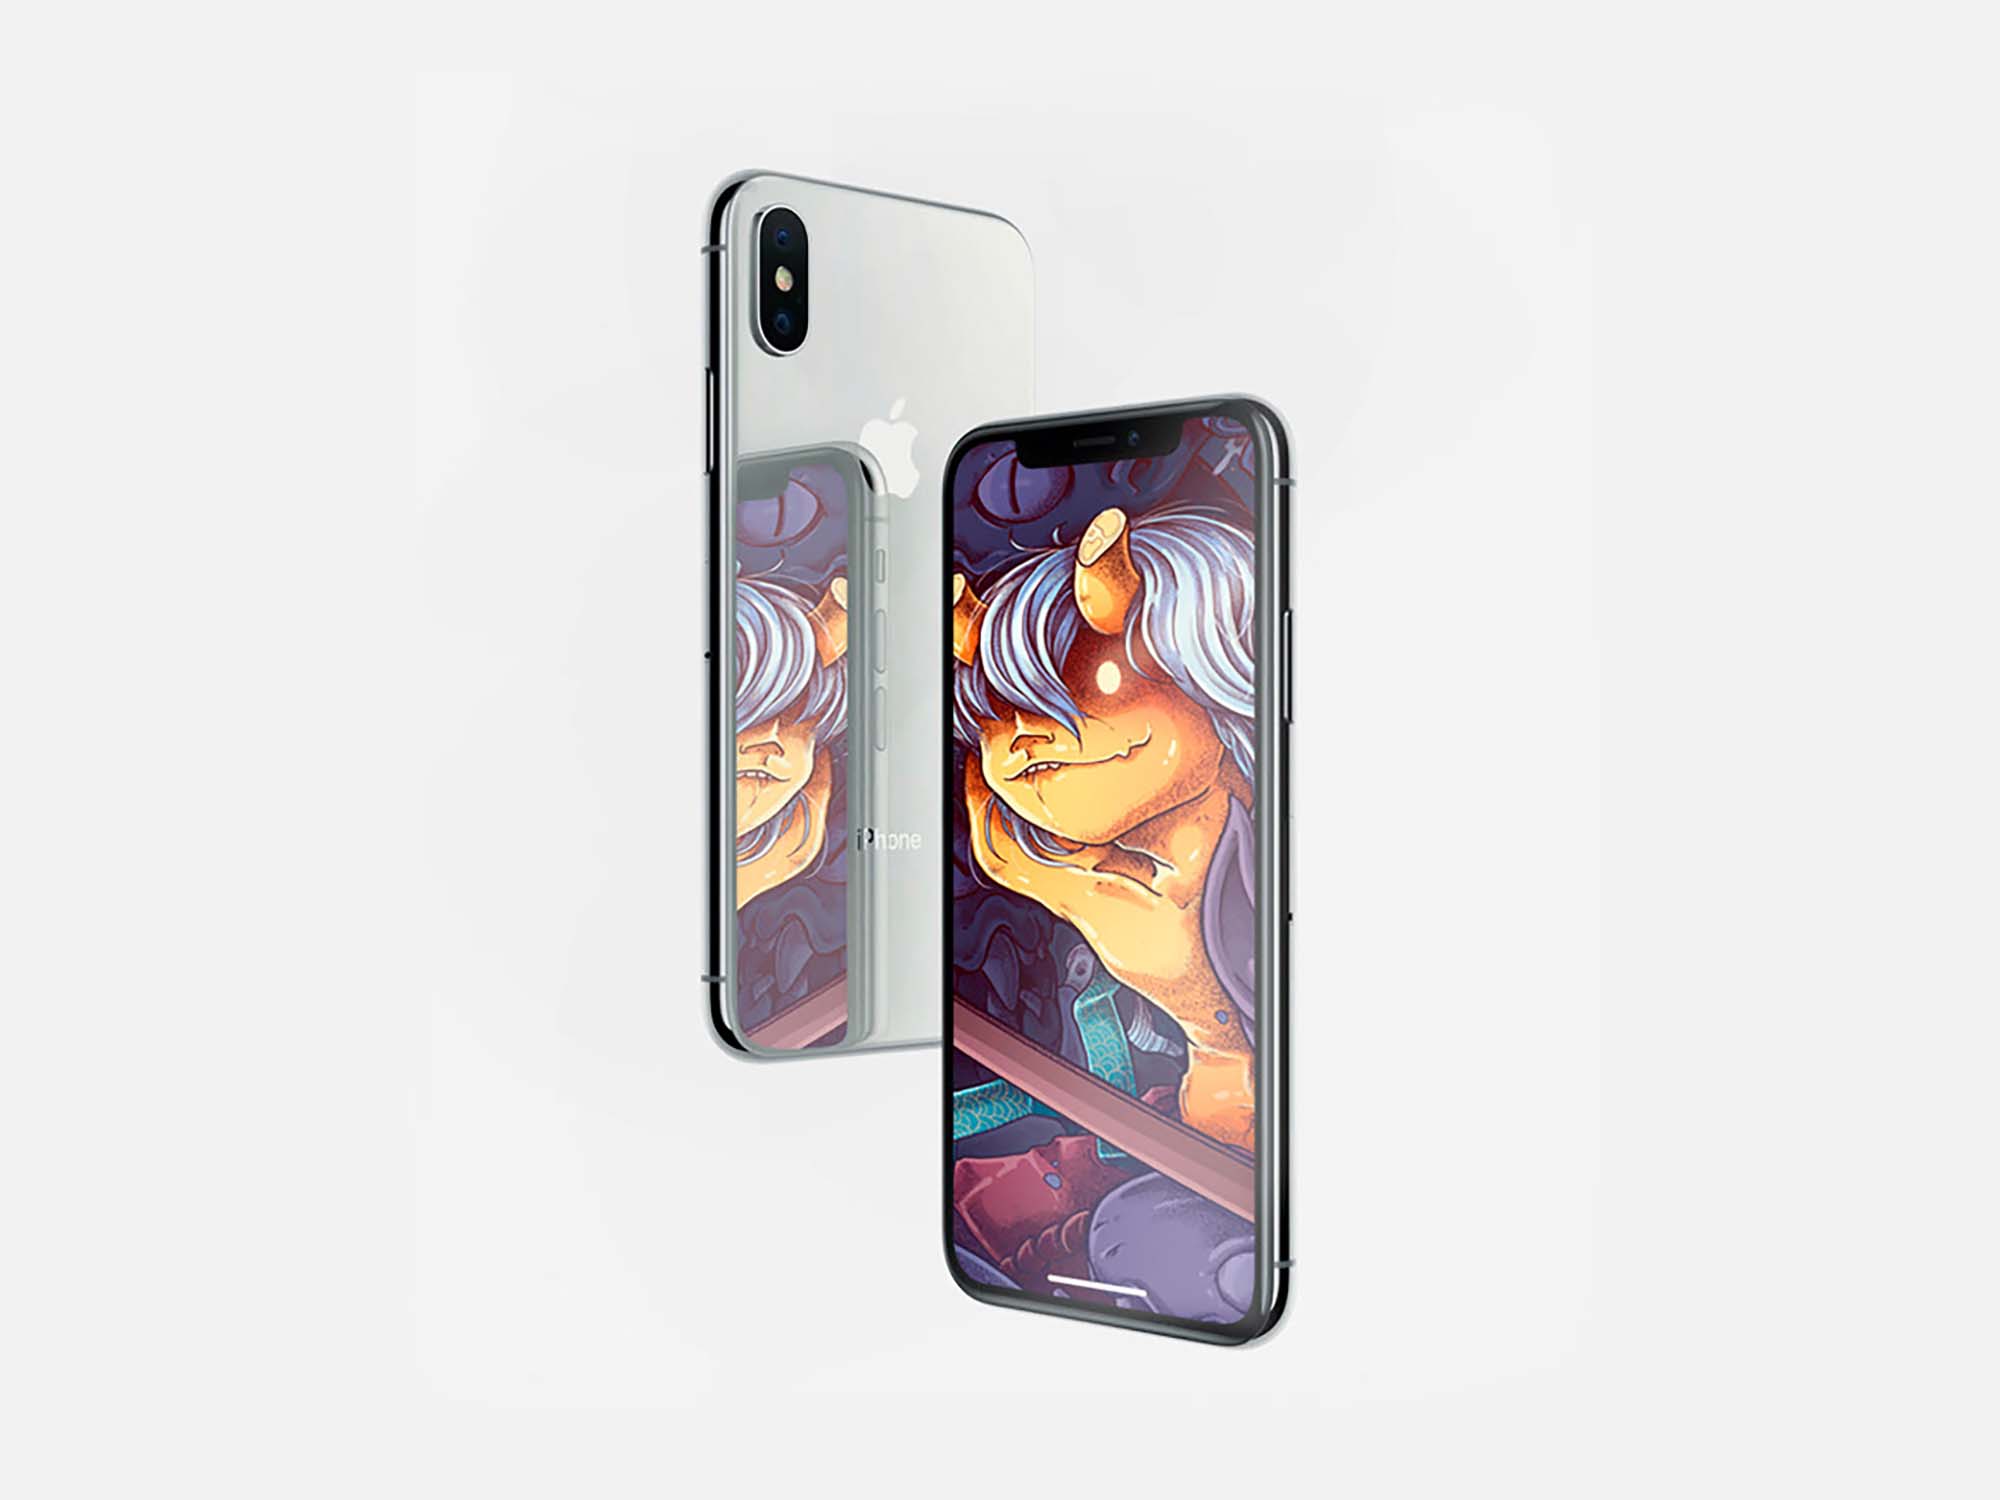 Two iPhone X Mockup with Reflection